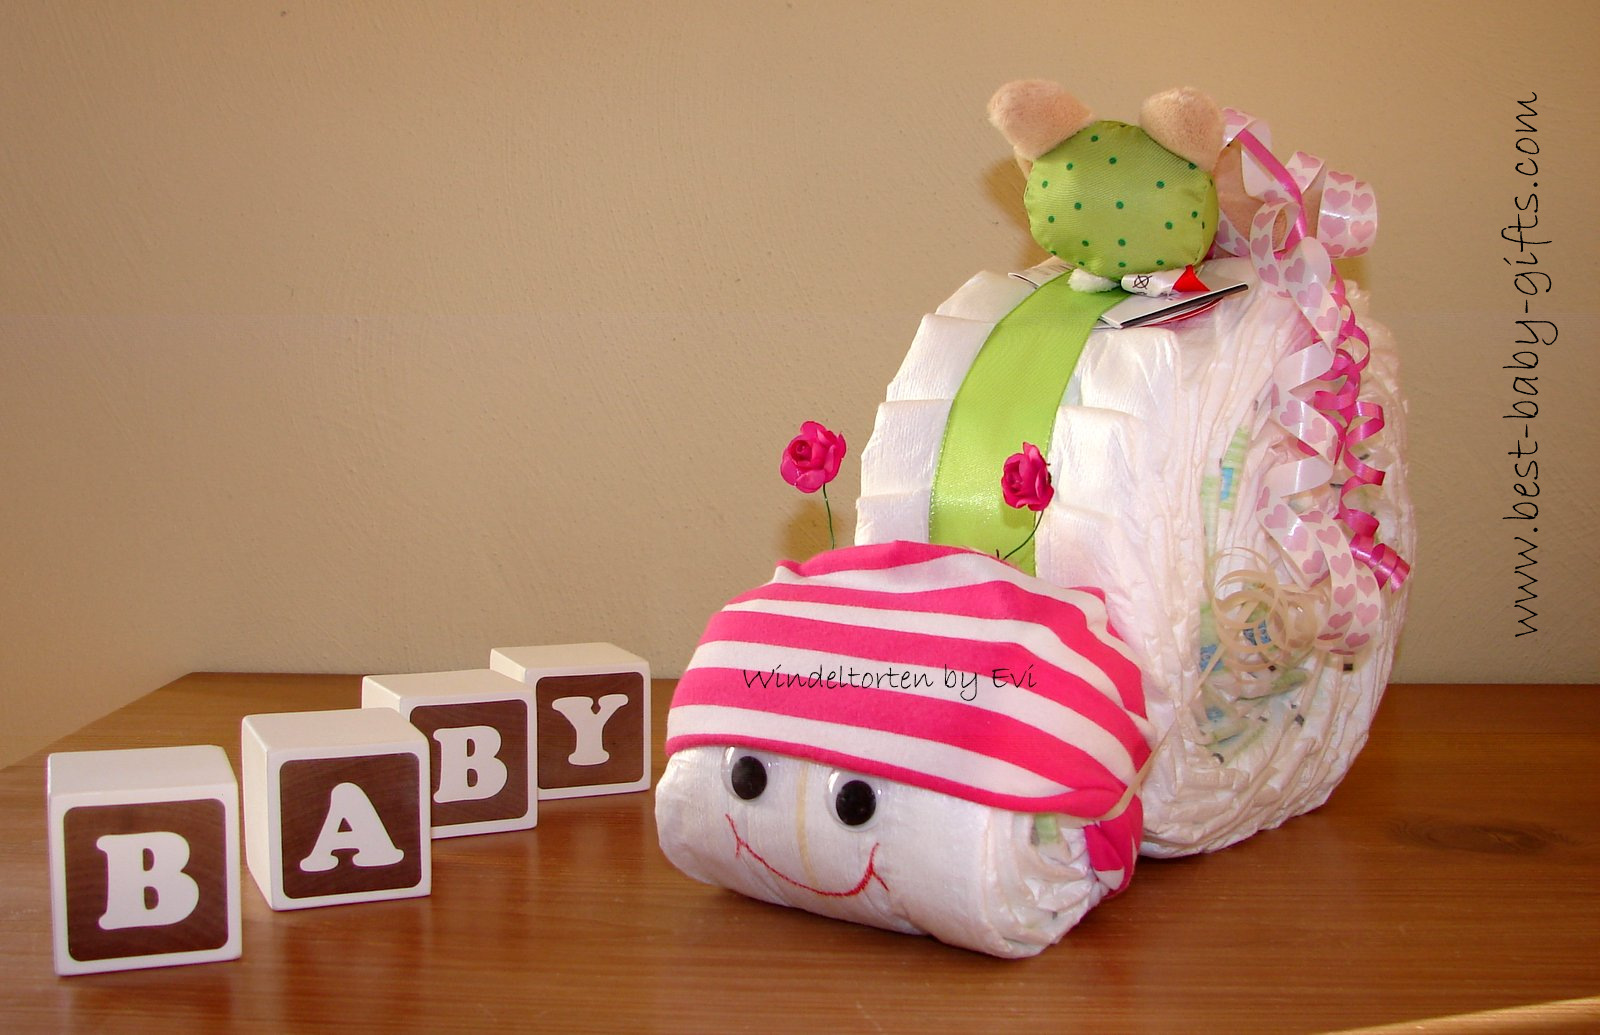 Homemade Baby Shower Gifts Make A Special Diy Newborn Gift